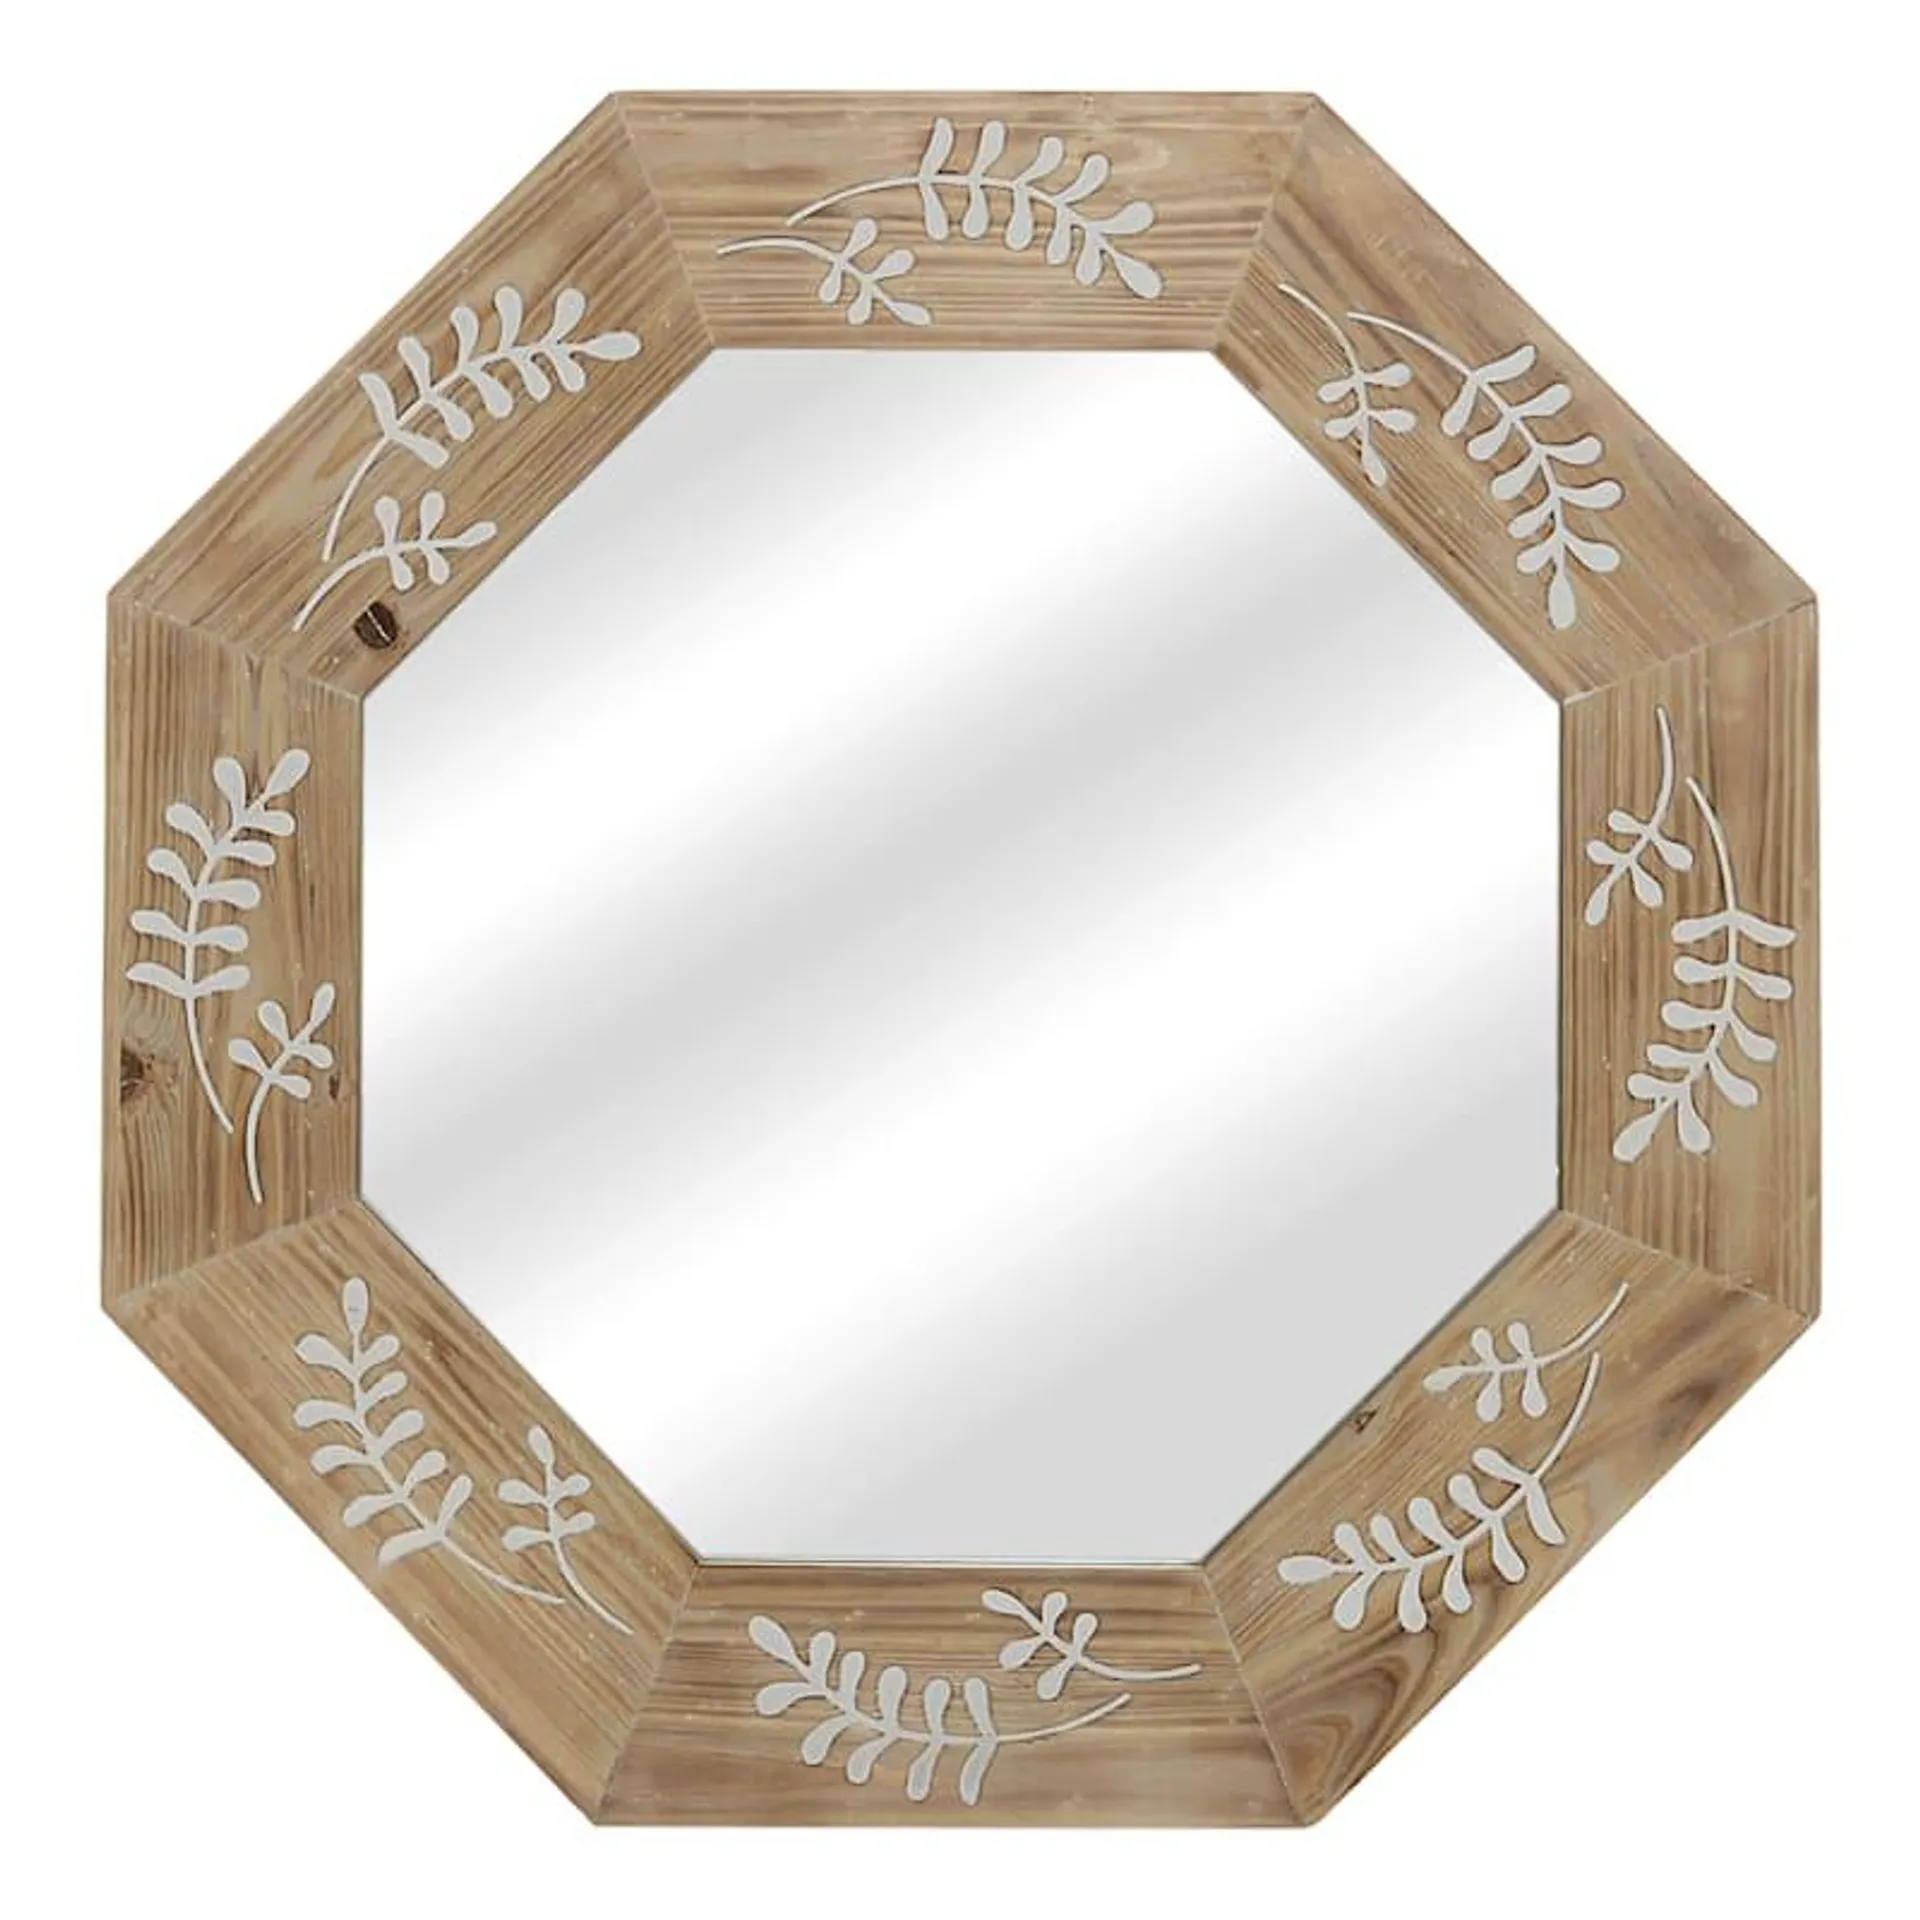 Etched Wood Octagon Wall Mirror, 28"